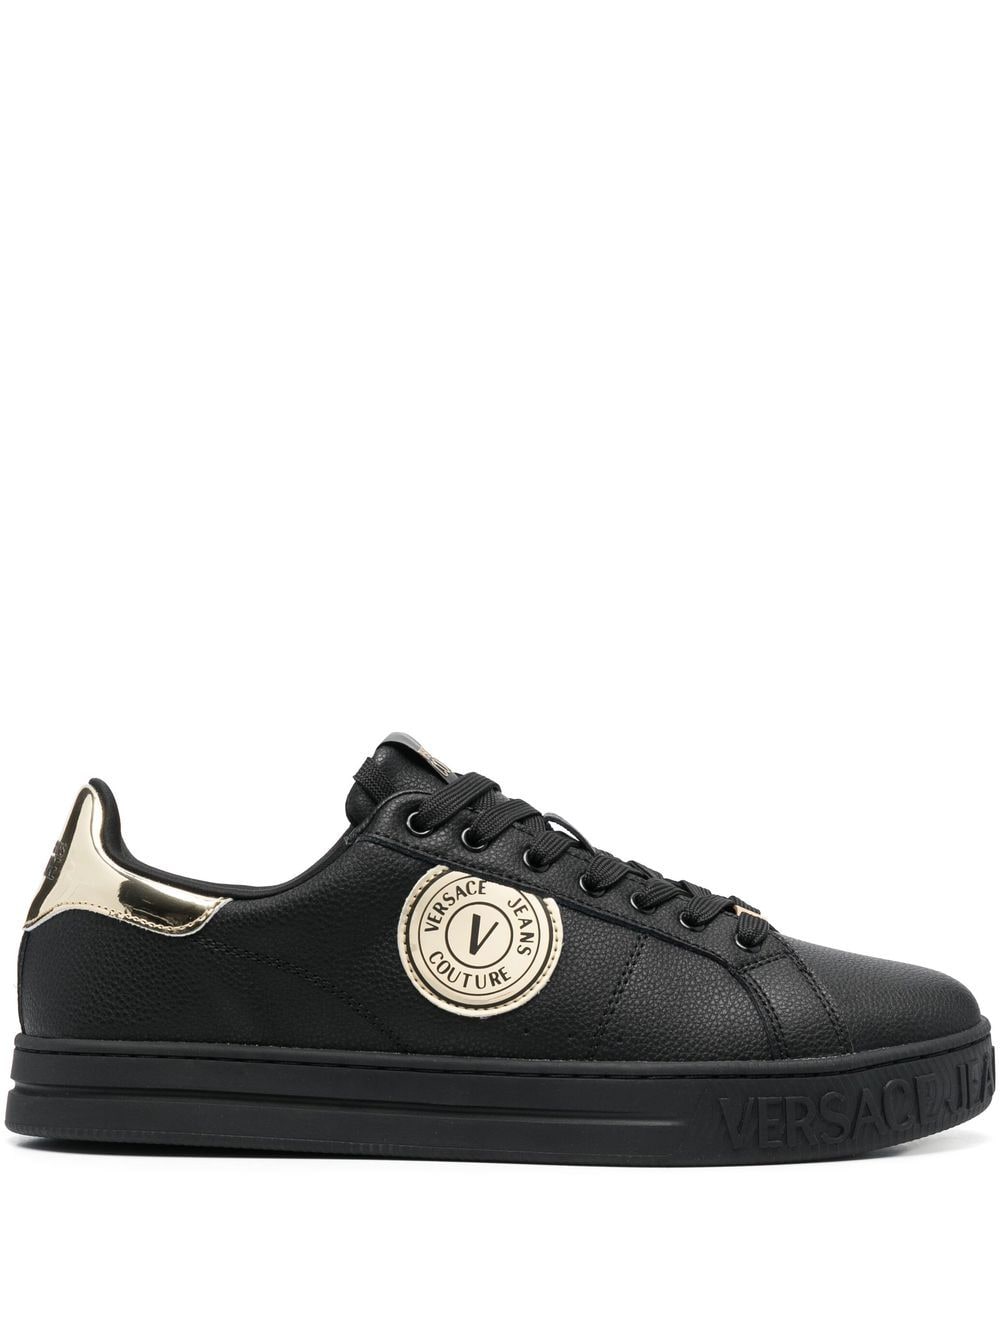 Versace Jeans Couture logo-patch low-top sneakers - Black